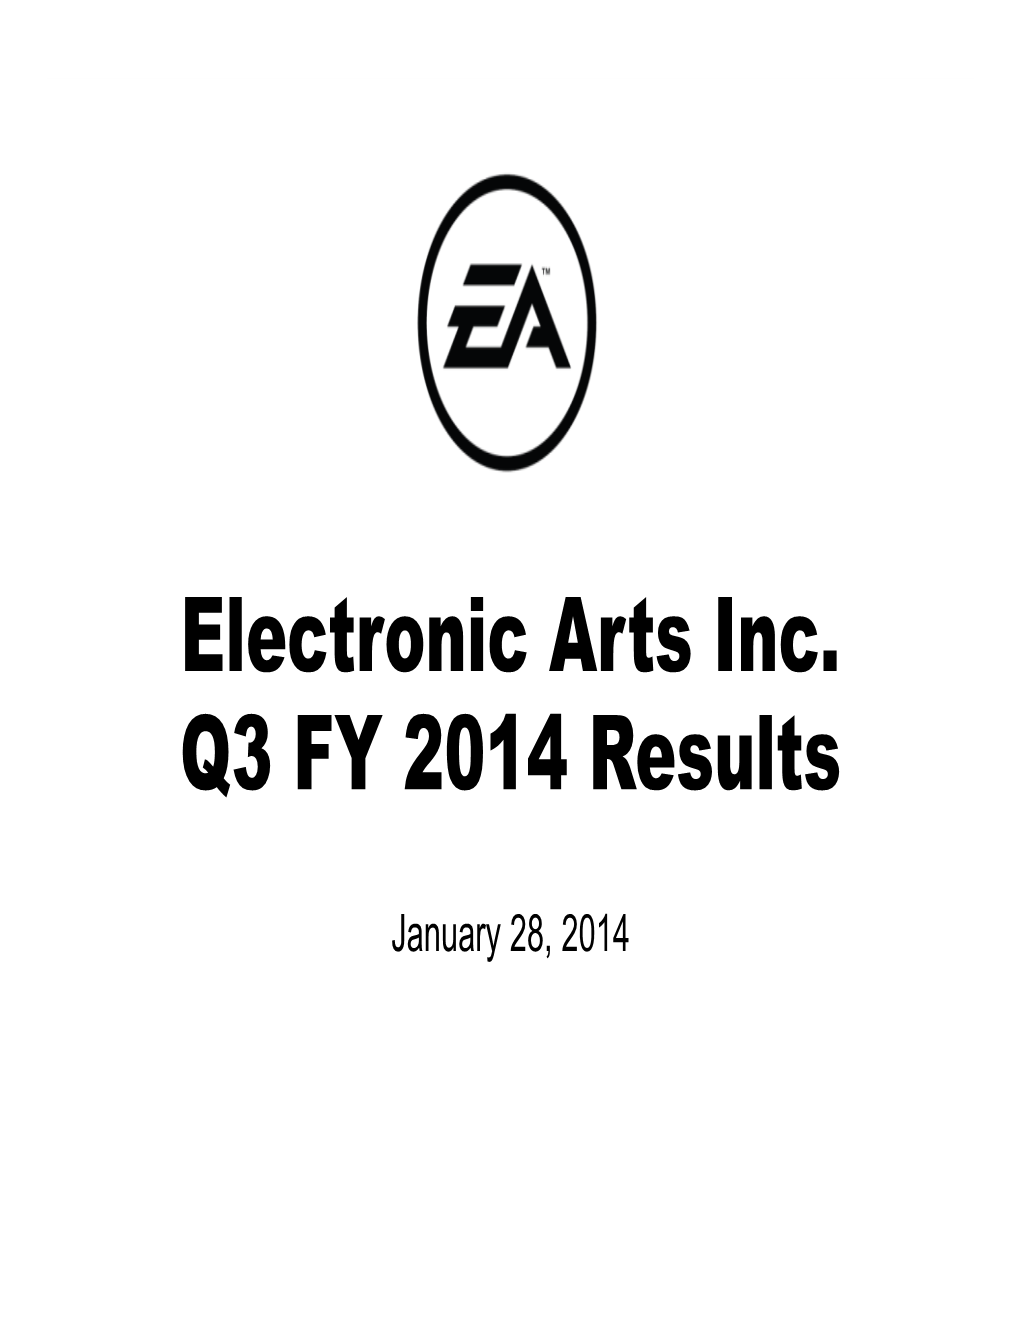 Electronic Arts Inc. Q3 FY 2014 Results